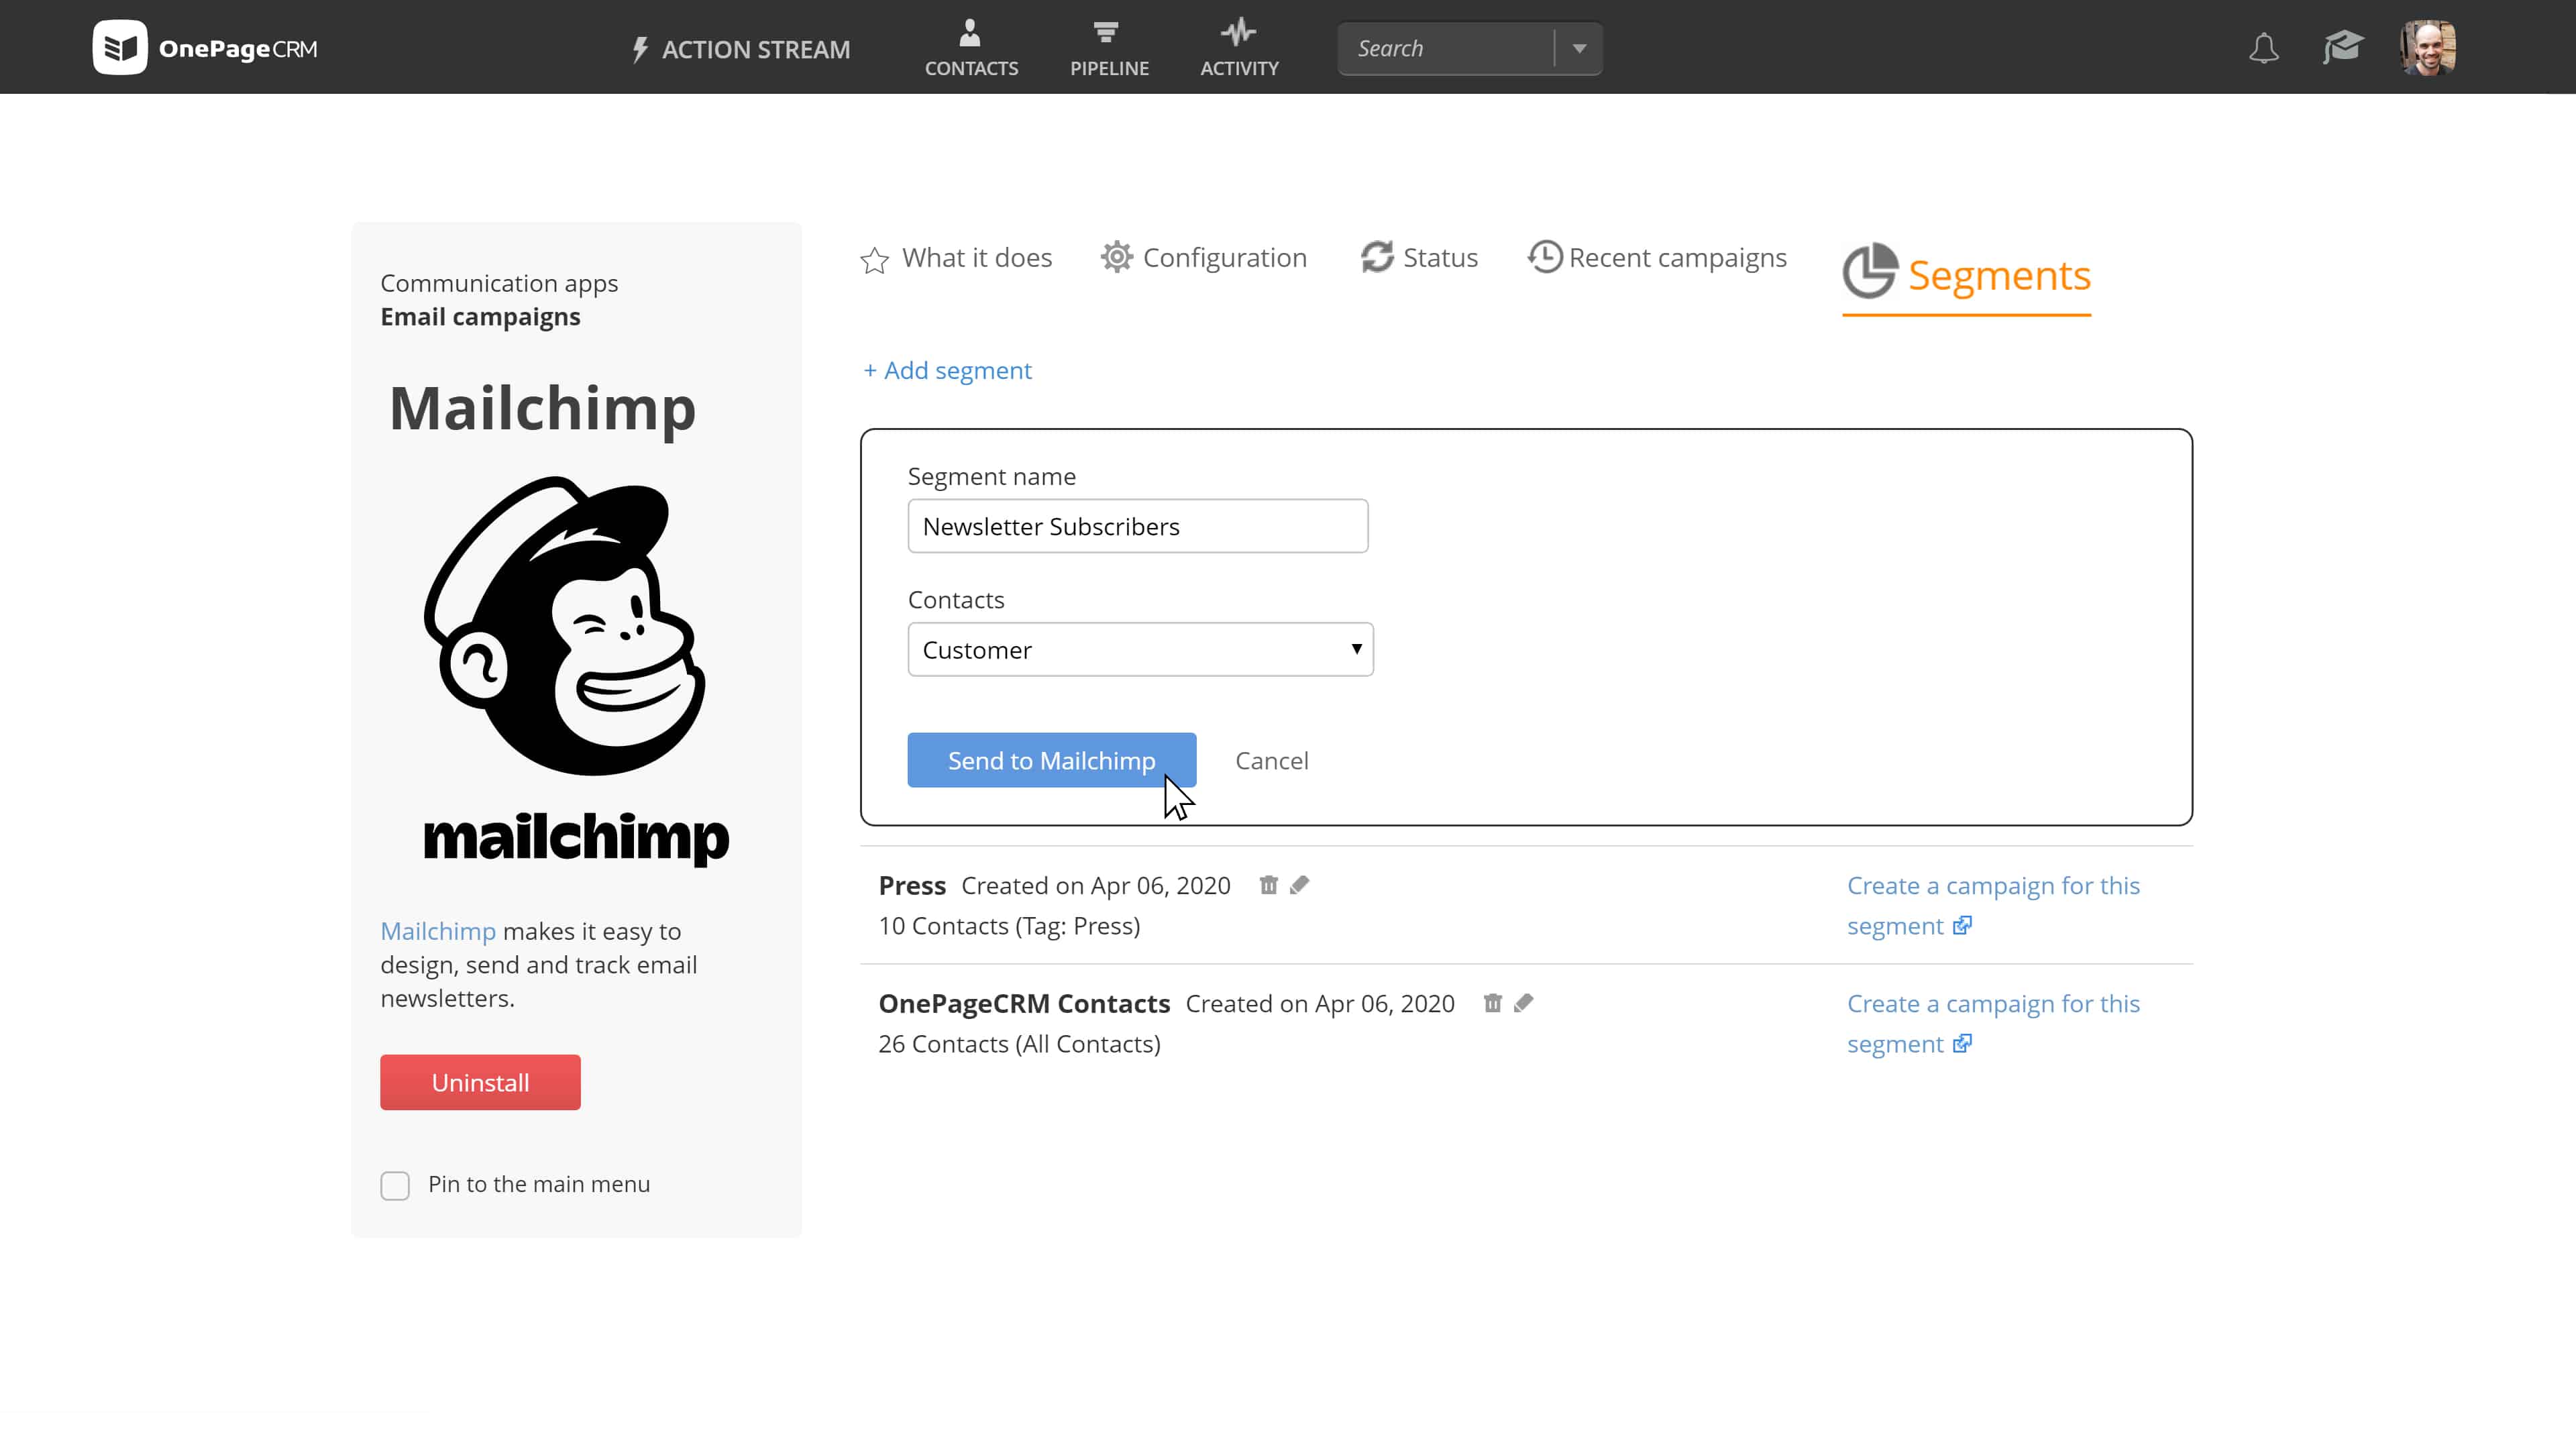 Mailchimp integration with CRM OnePageCRM